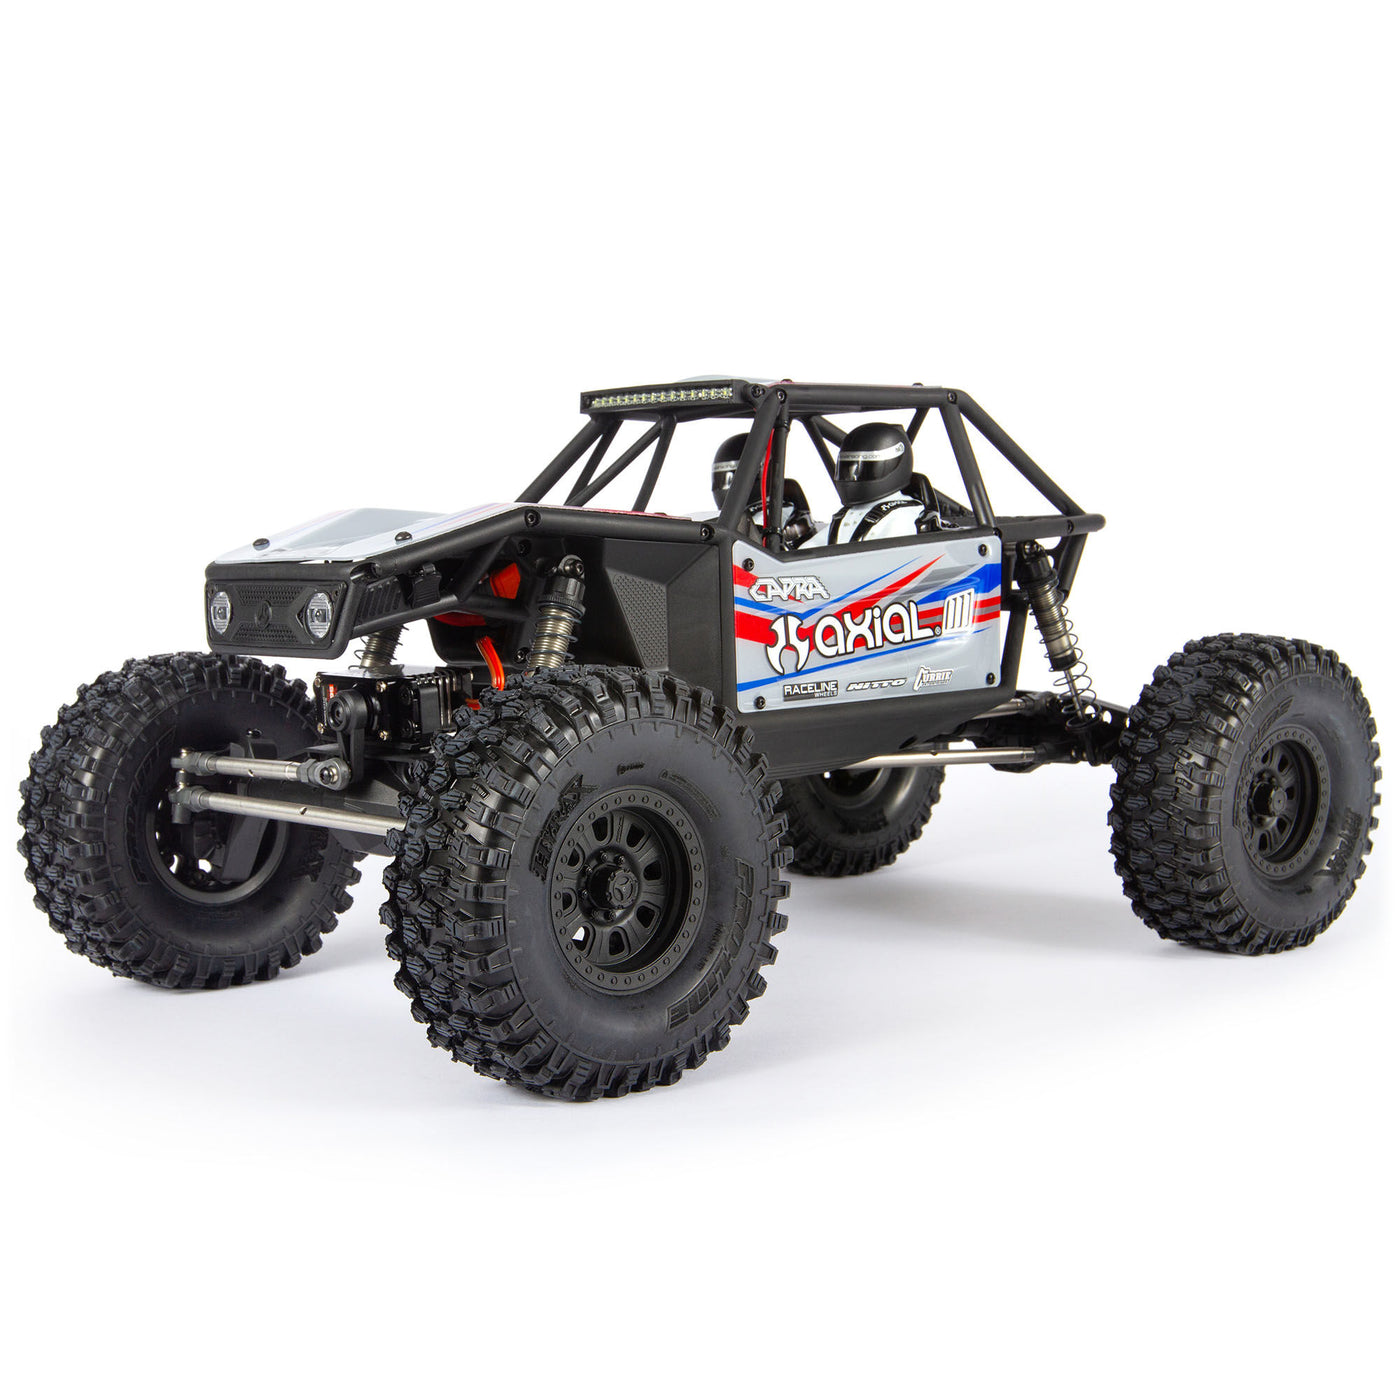 AXI 03004 1/10 Capra 1.9 4WD Unlimited Trail Buggy Kit